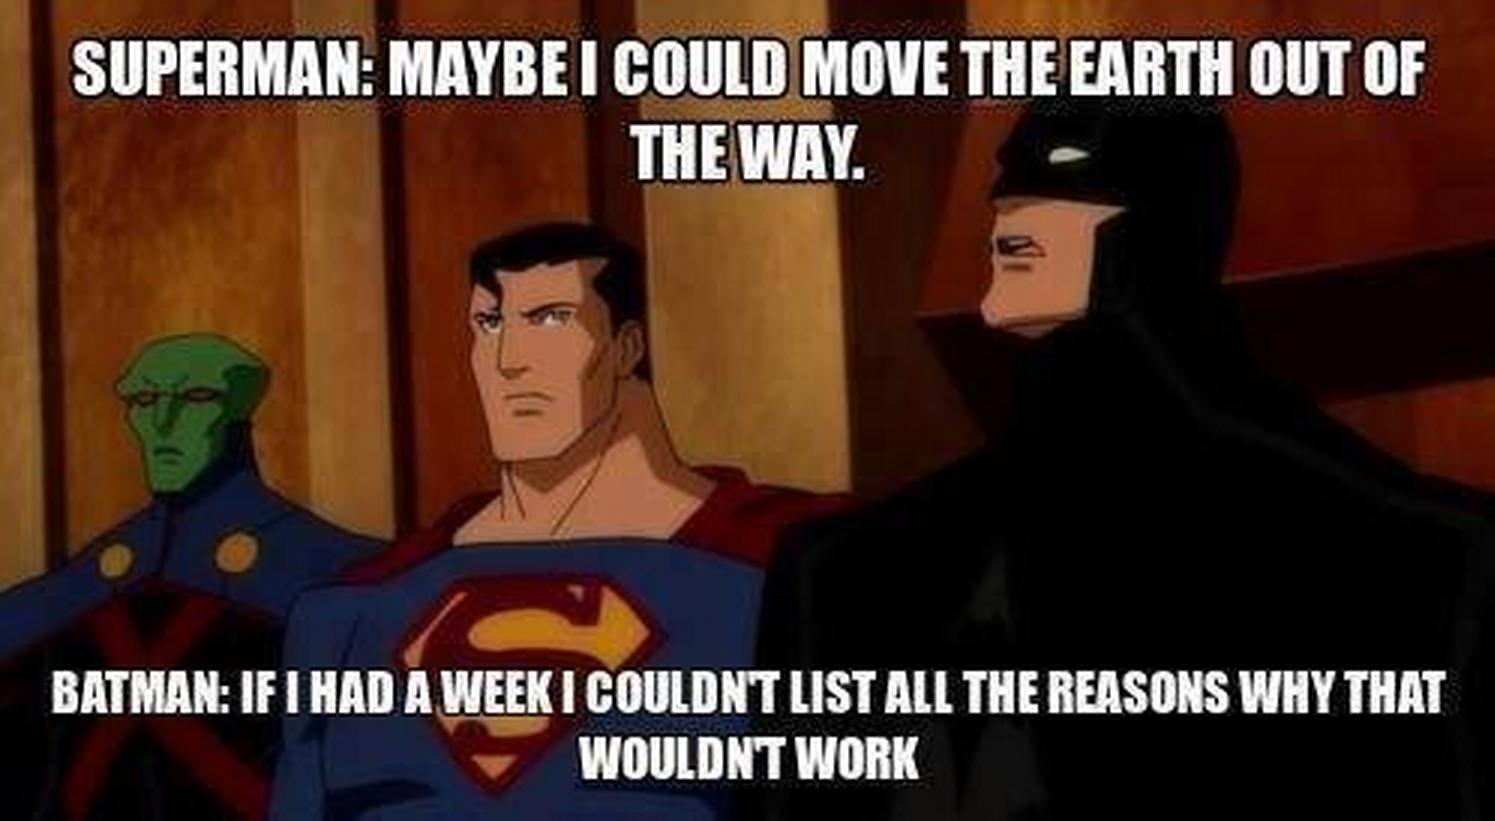 superman and batman funny quotes - Superman Maybe I Could Move The Earth Out Of The Way. Batman If I Had A Week I Couldnt List All The Reasons Why That Wouldnt Work